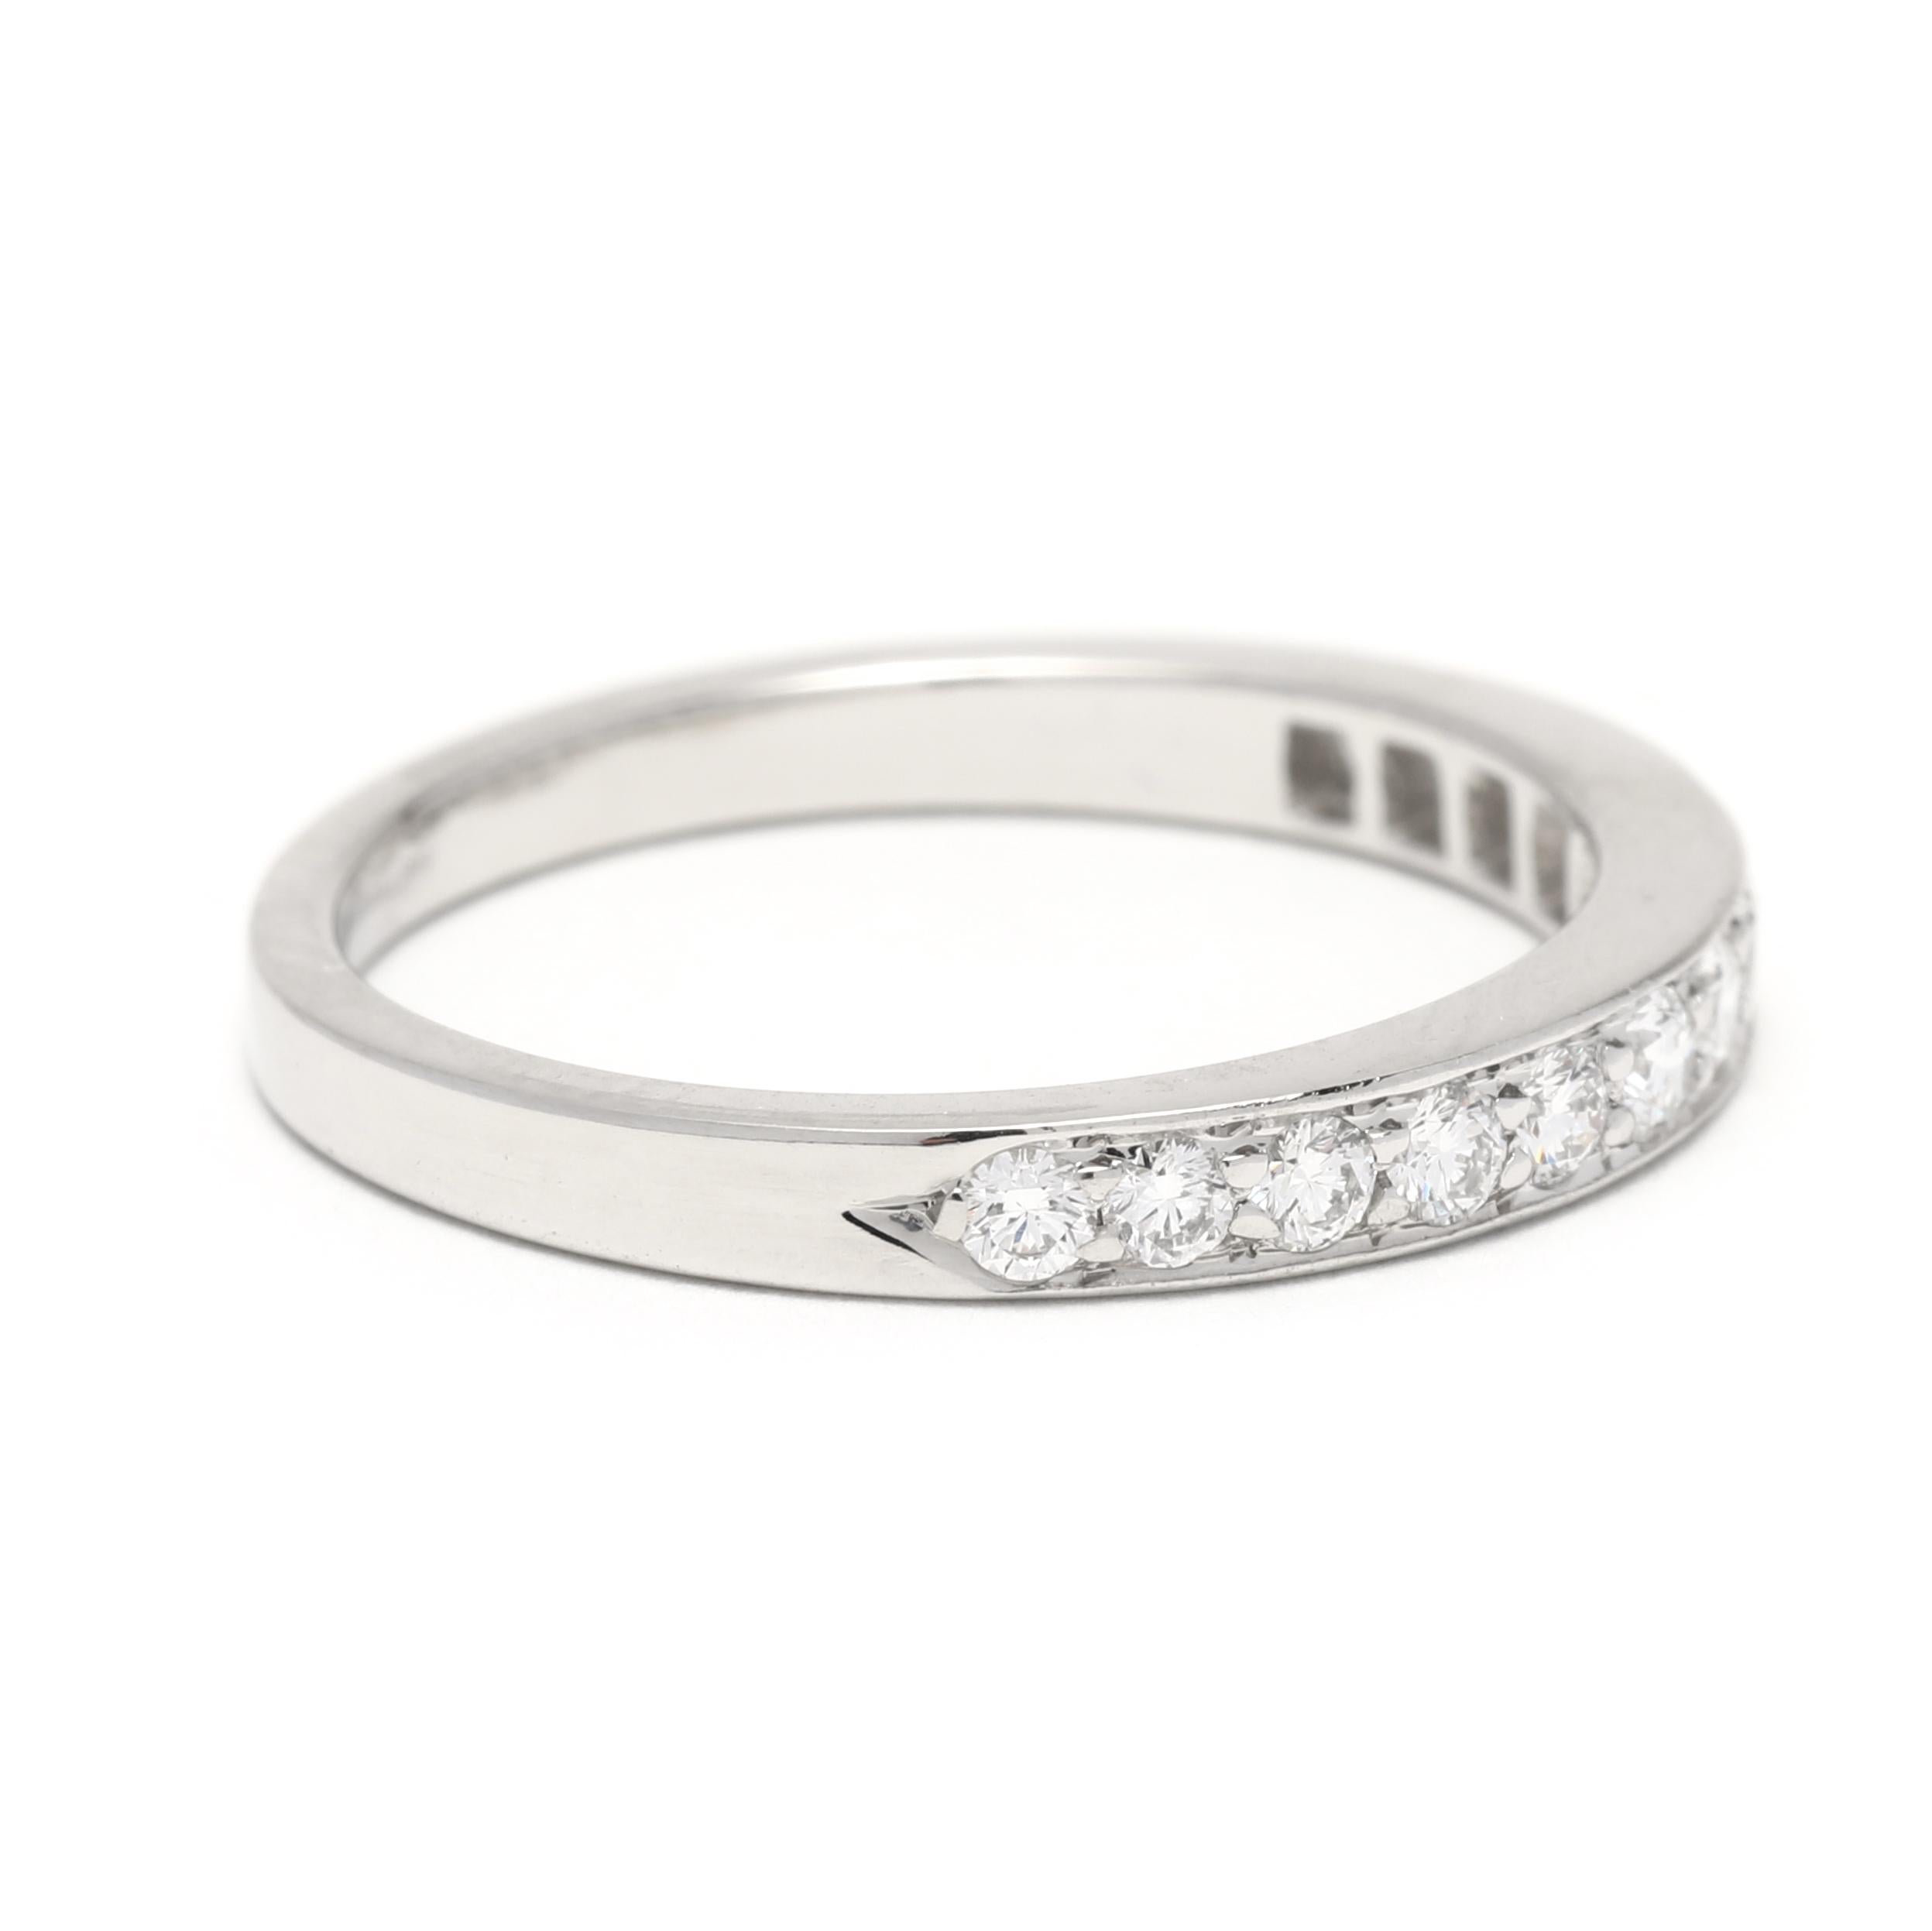 This delicate and elegant wedding band is crafted in high-quality platinum, known for its durability and luxurious appearance. The slim and sleek design of the band adds a touch of delicacy and sophistication to the ring, making it perfect for any